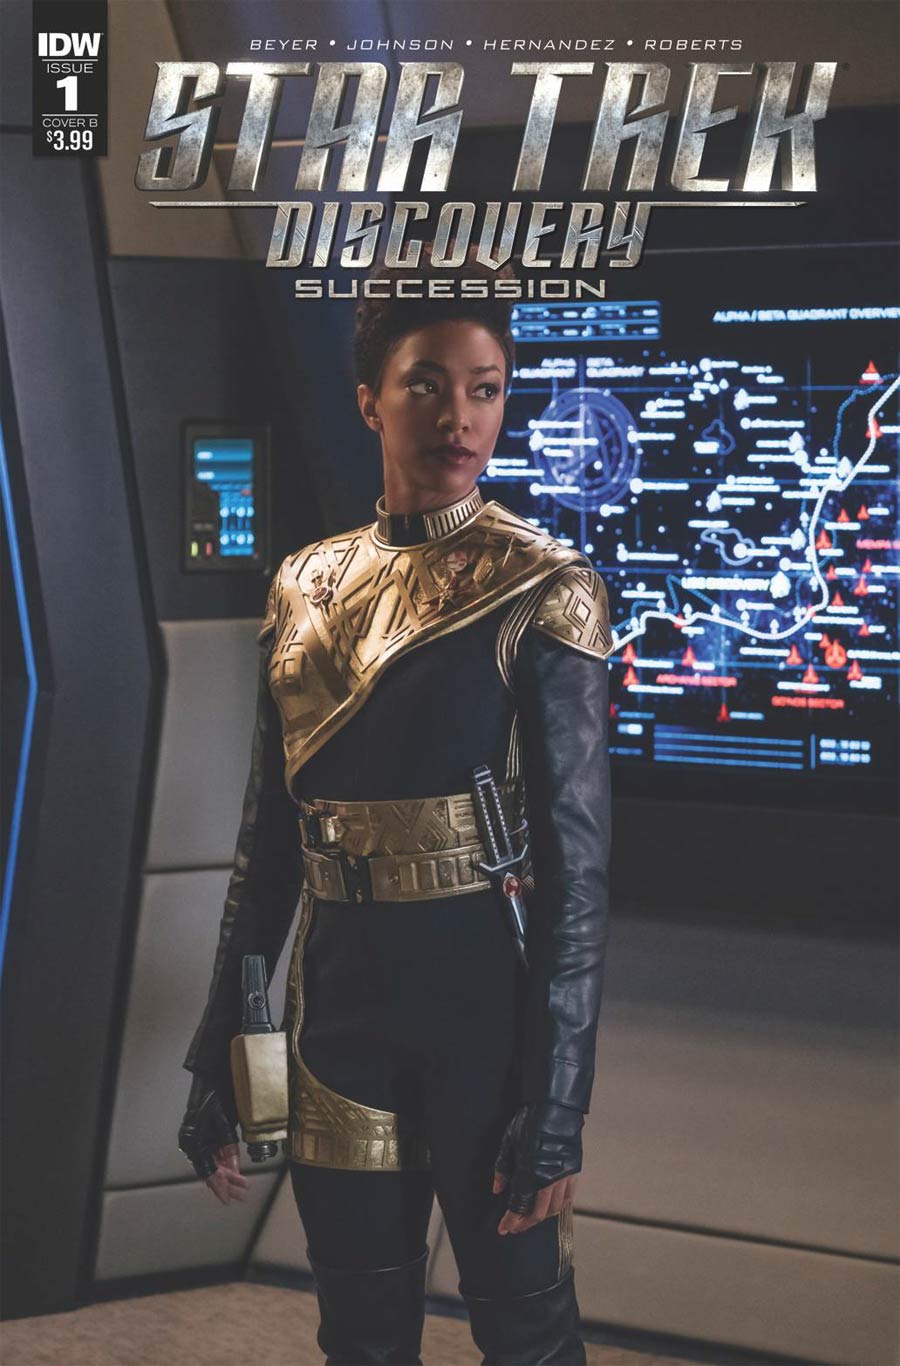 Star Trek Discovery Succession #1 Cover B Variant Photo Cover